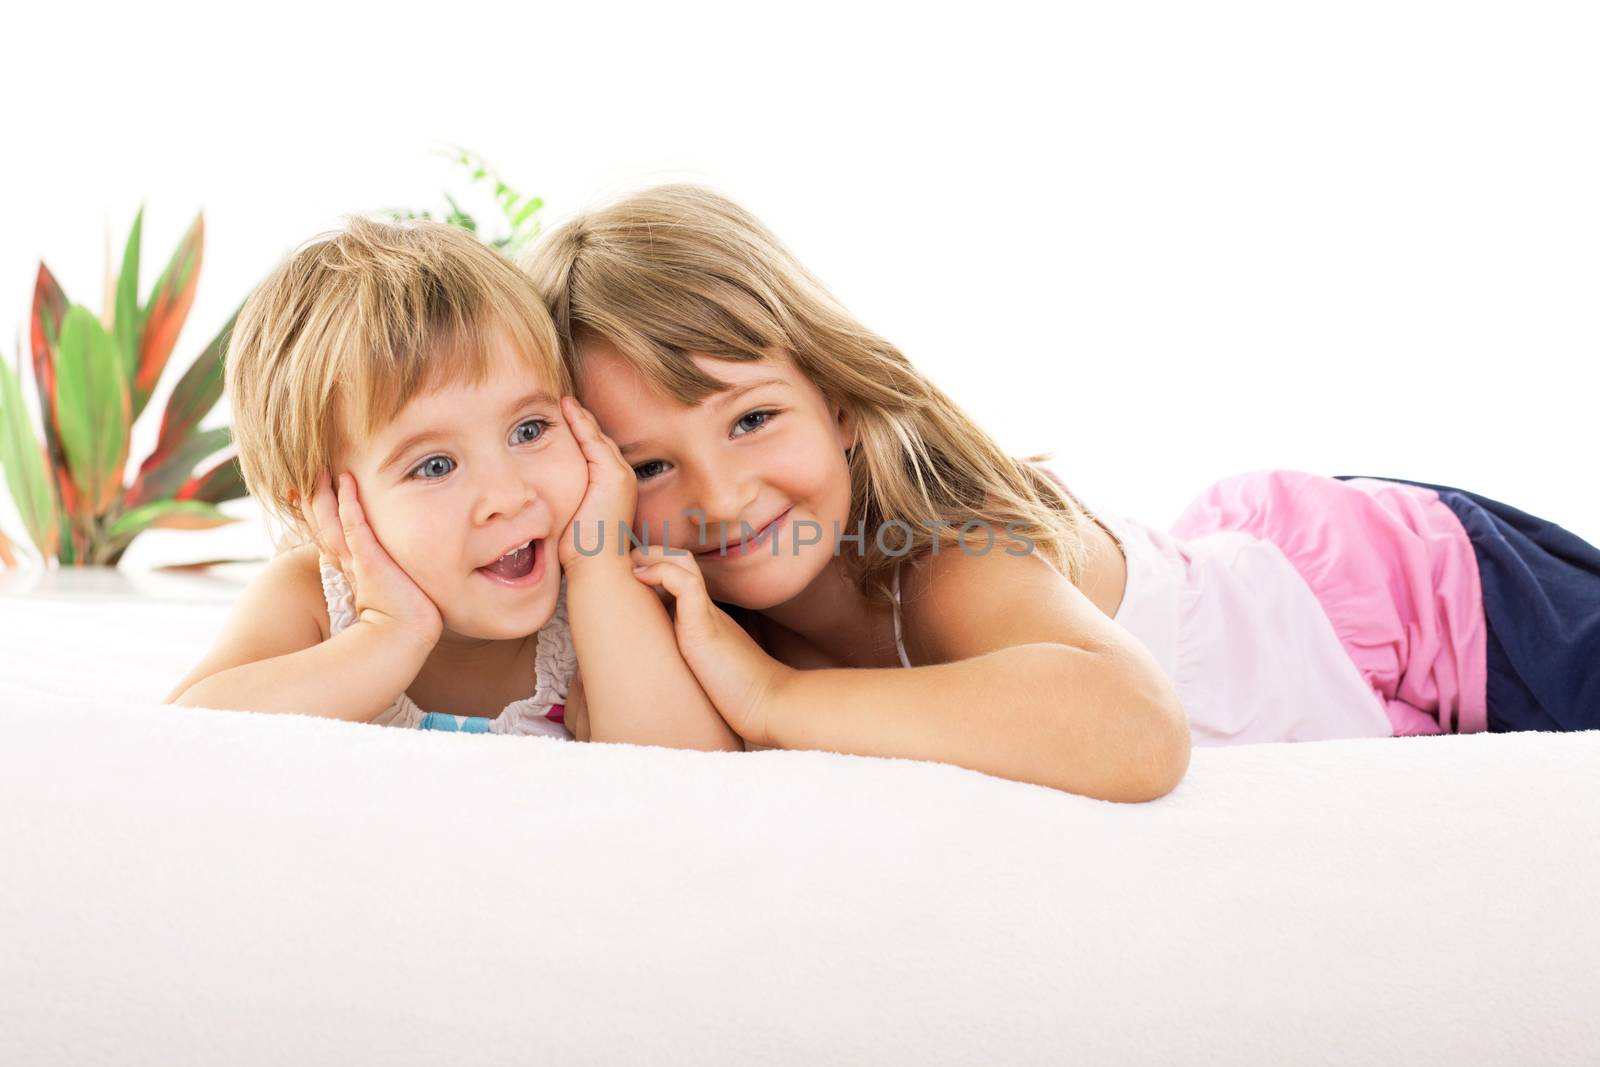 Two Happy little girls lying on bed and hugging each other